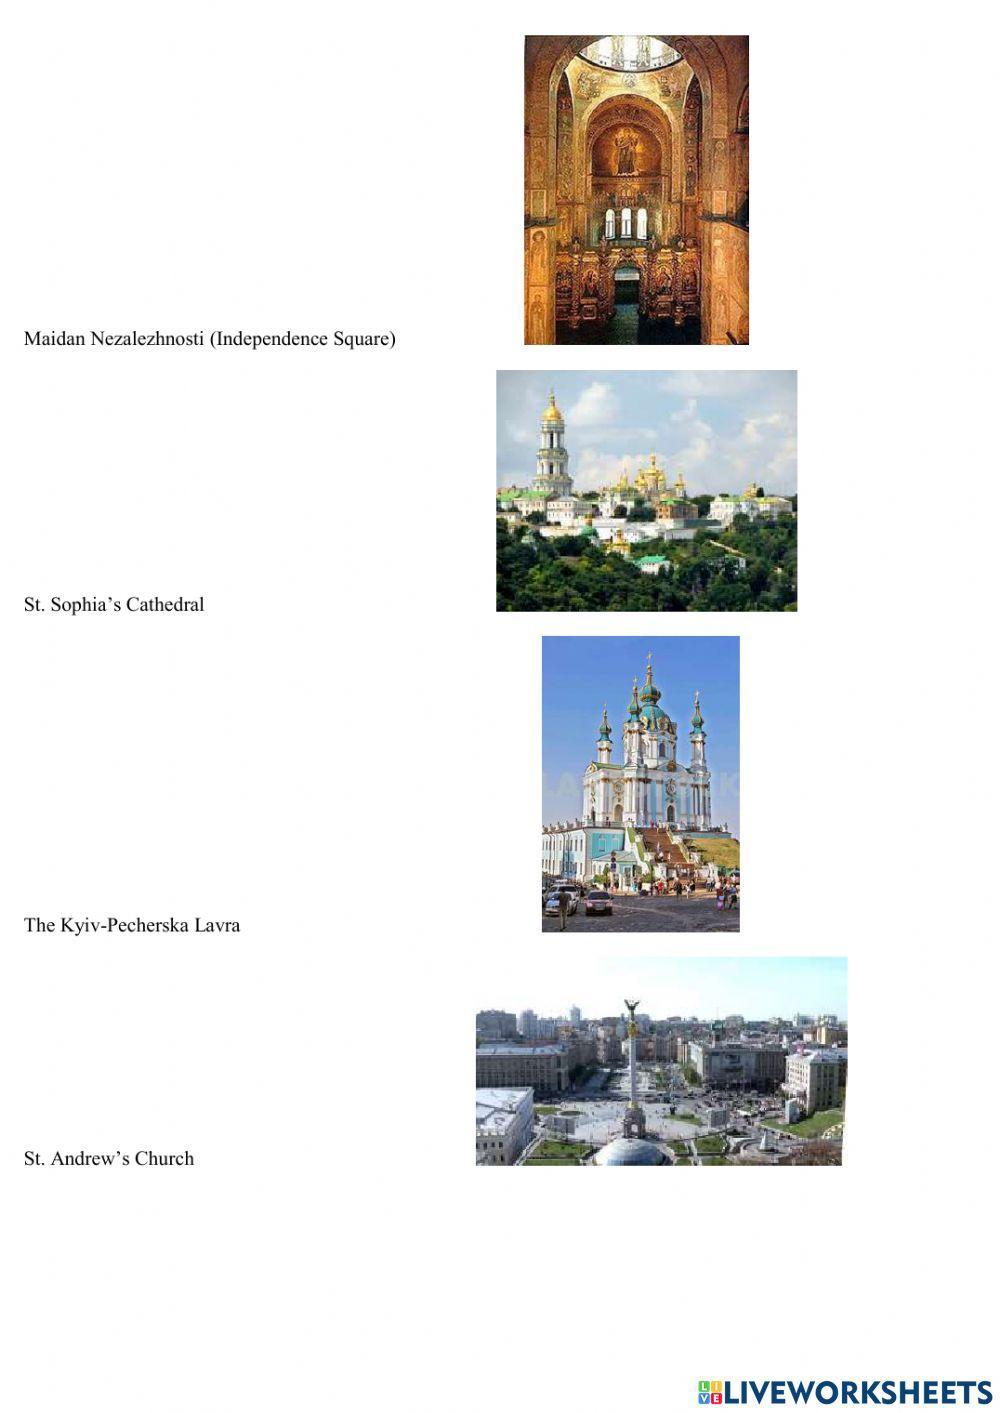 Some Kyiv's attractions